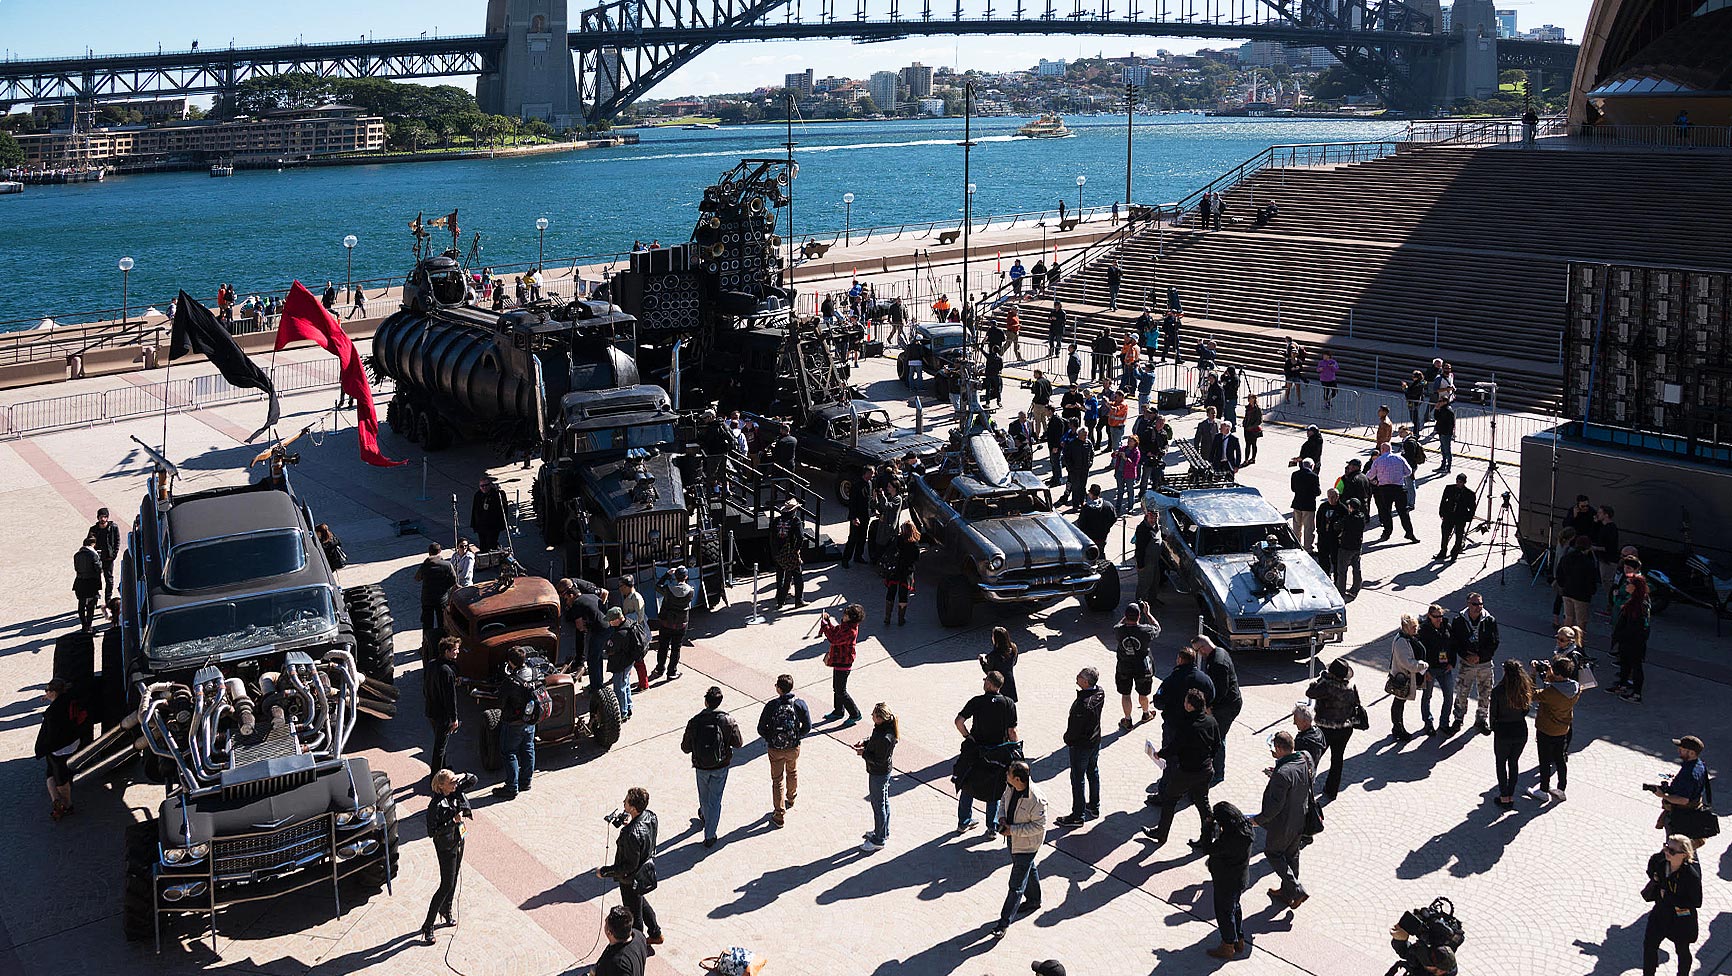 Parking managementPictured: Mad Max publicity activation including road closure of the Cahill Expressway through to the Sydney Opera House forecourt (photo courtesy of Kennedy Miller Mitchell).